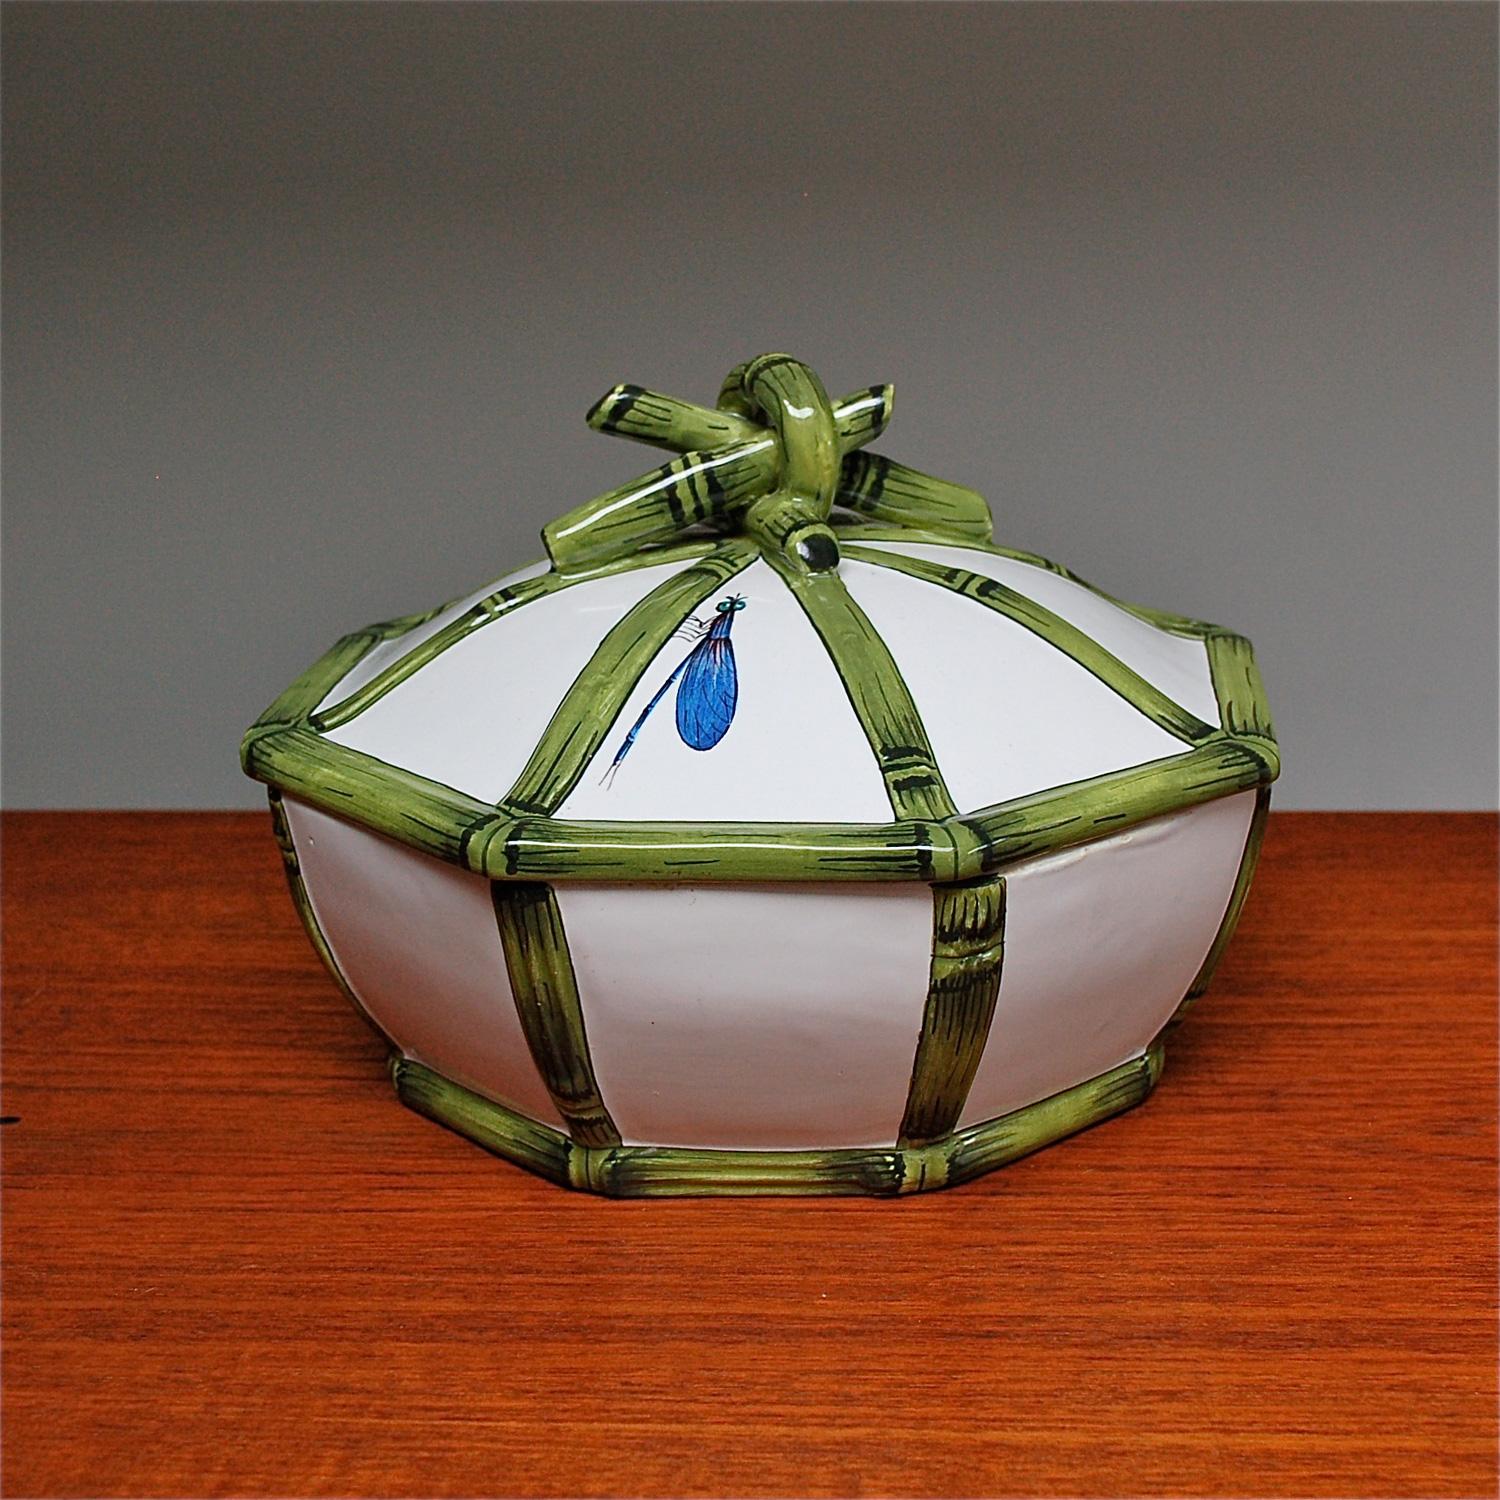 Vintage hand painted Italian pottery serving bowl by COSTA waith bamboo and dragonfly decoration. The base of this piece is octagonal in shape. Each handle, edge or rim is decorated with a green, hand painted, raised bamboo motif. The handle at the